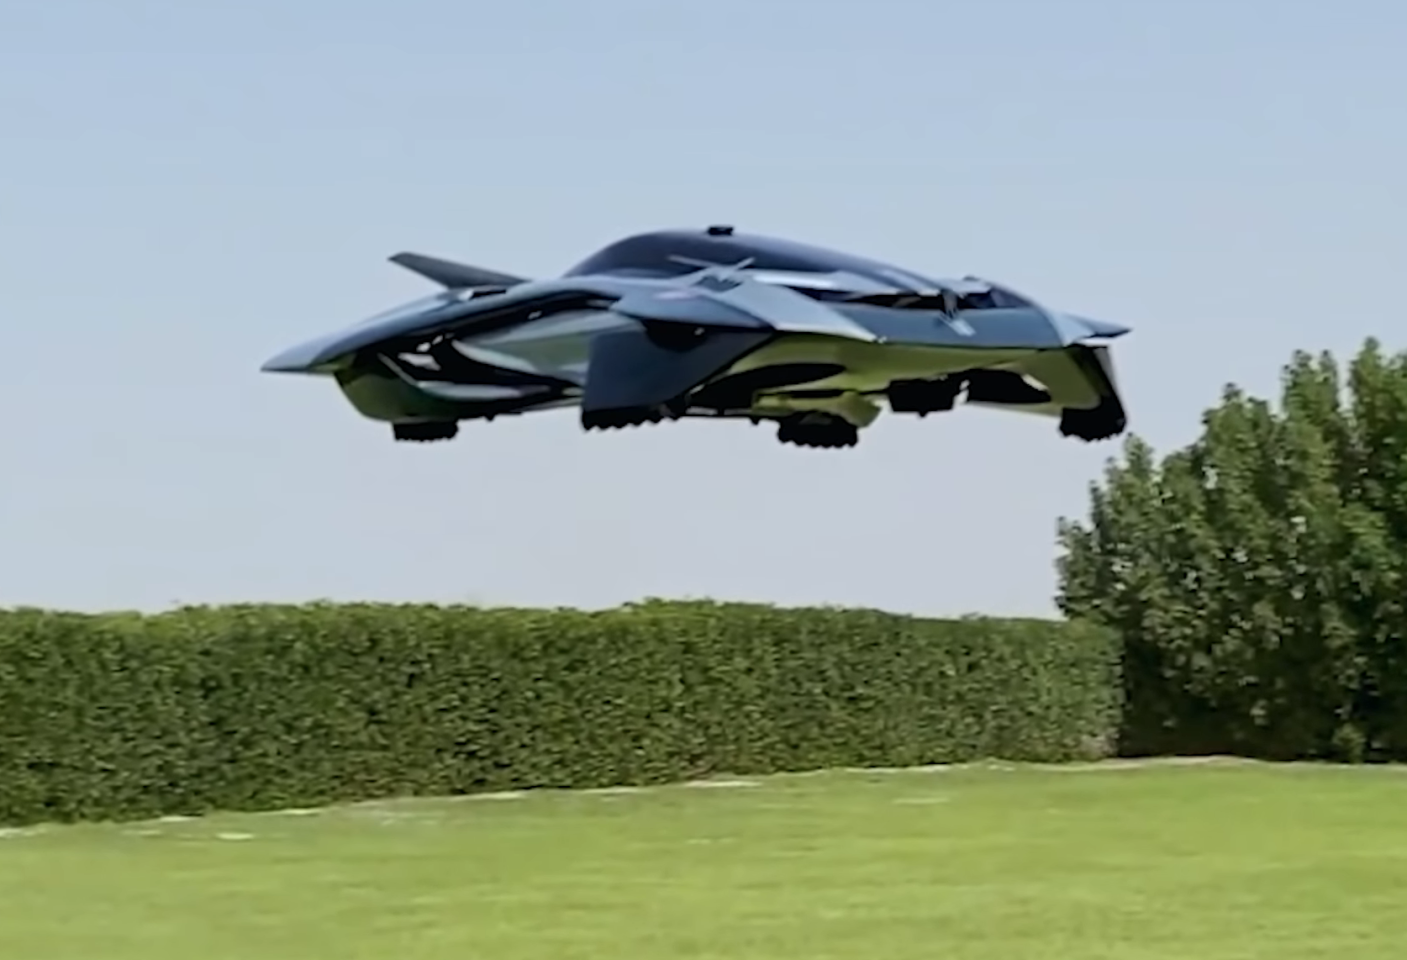 The video shows essentially a drone with a bodykit